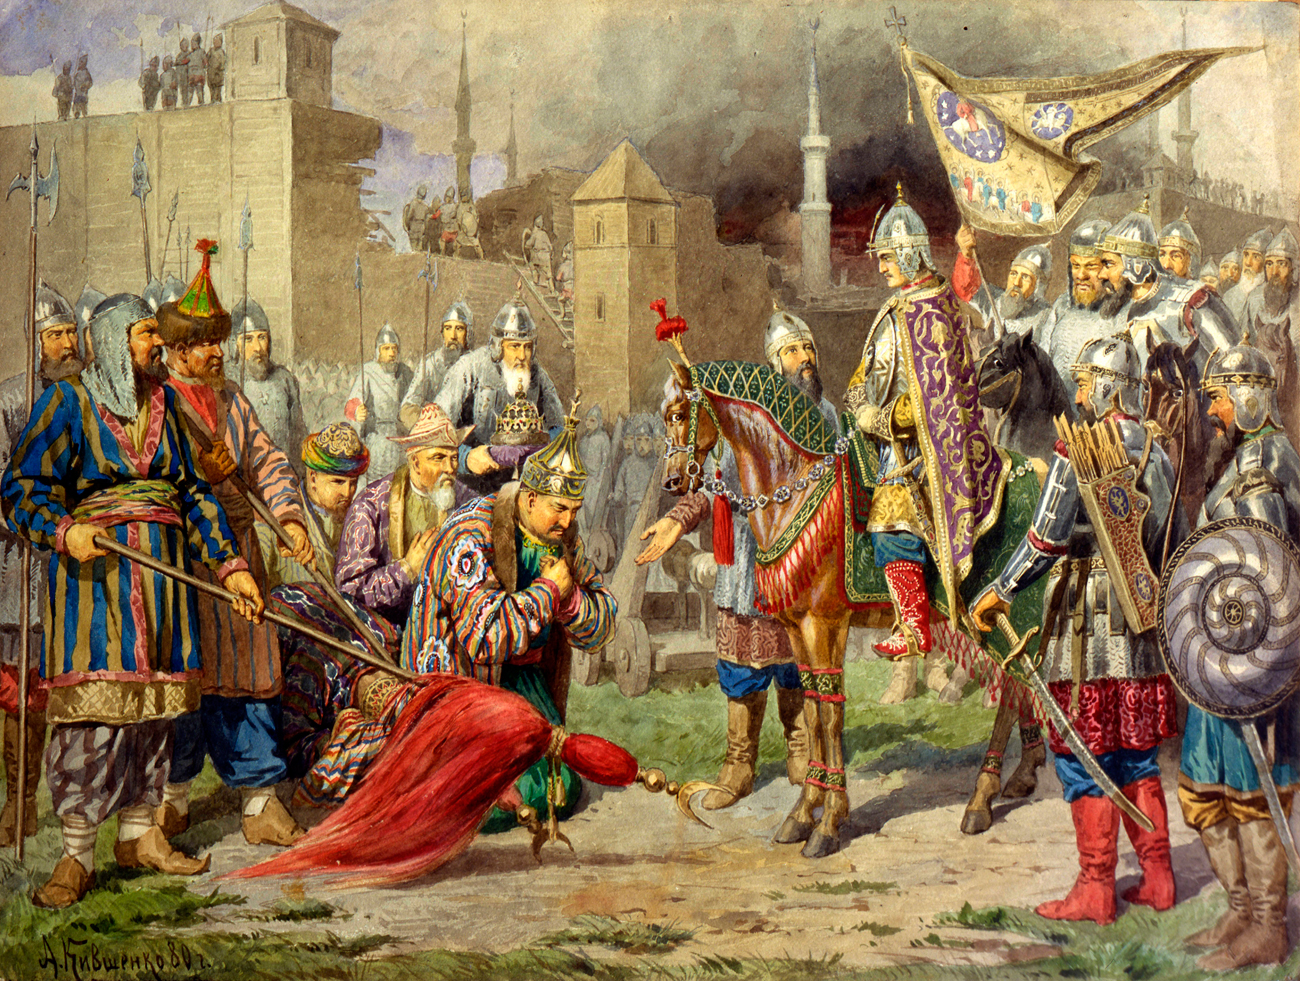 Tsar Ivan IV Conquering Kazan in 1552, 1880. Kazan, the capital of the Tatar Khanate of Kazan, fell to the Russian army of Ivan the Terrible after a siege in 1552. Many of the city's defenders and civilian inhabitants were massacred.